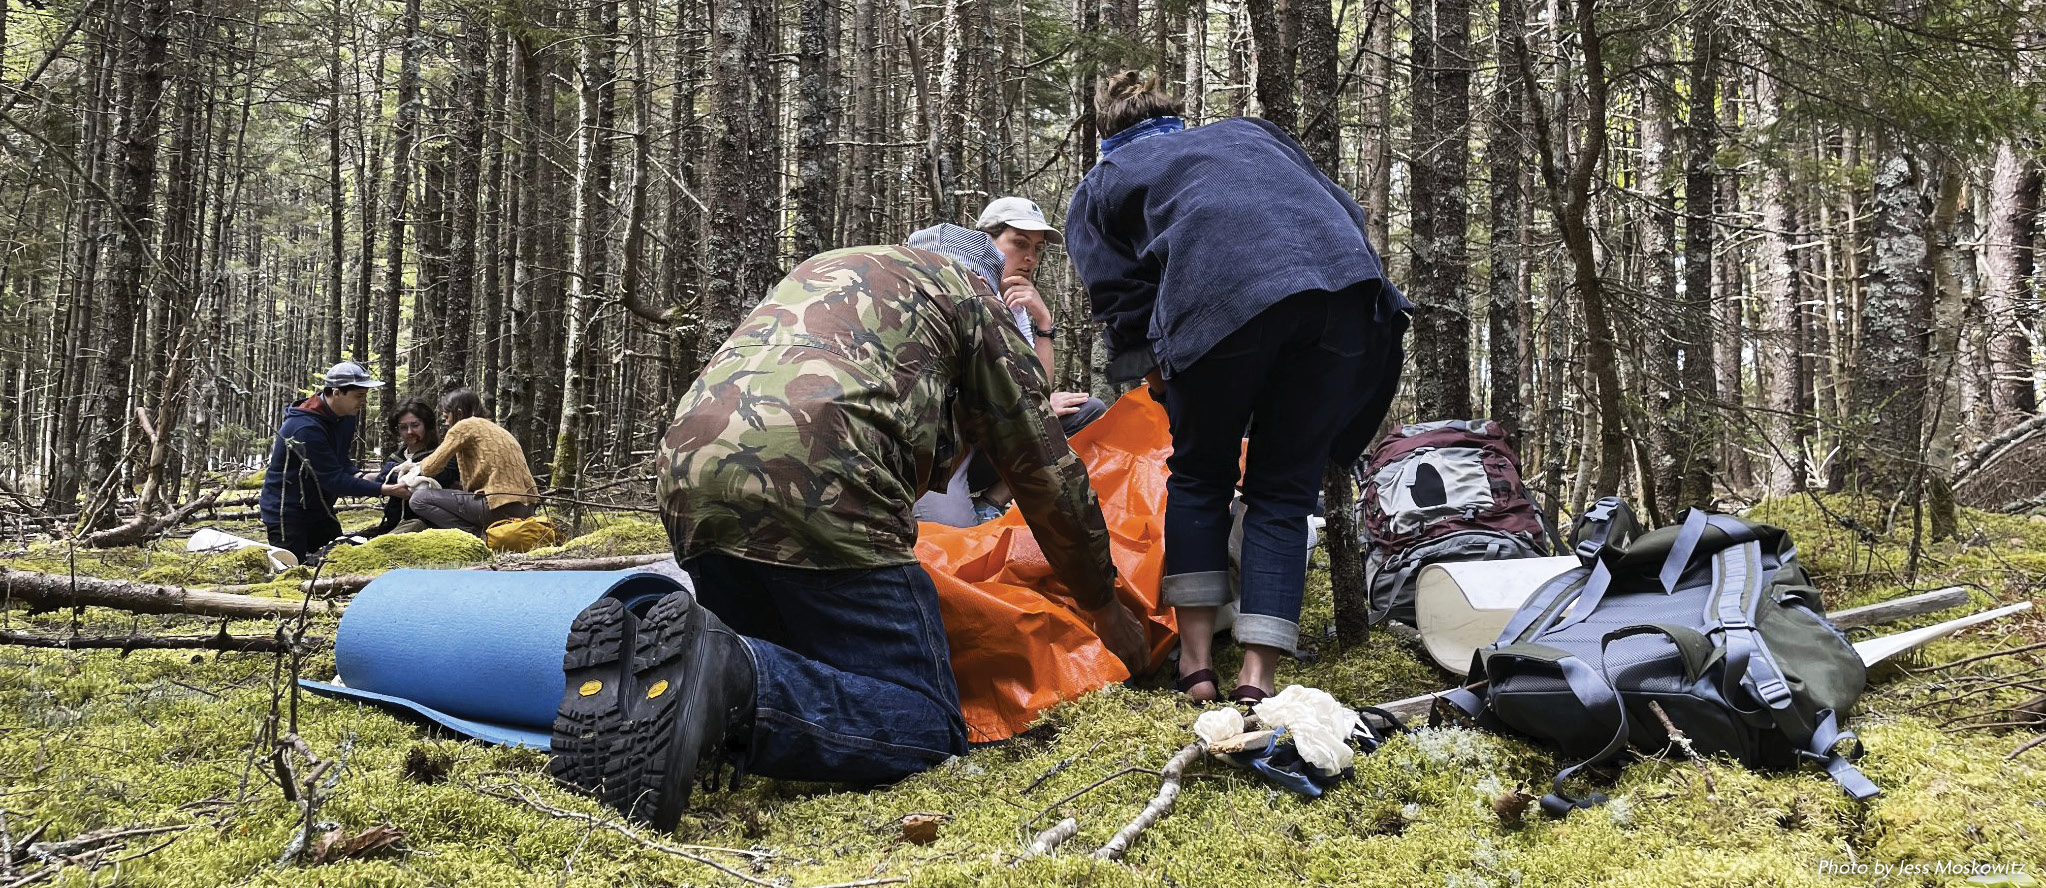 Participants in a Wilderness First Aid (WFA) course hone their emergency response skills in a simulated emergency scenario in the woods.